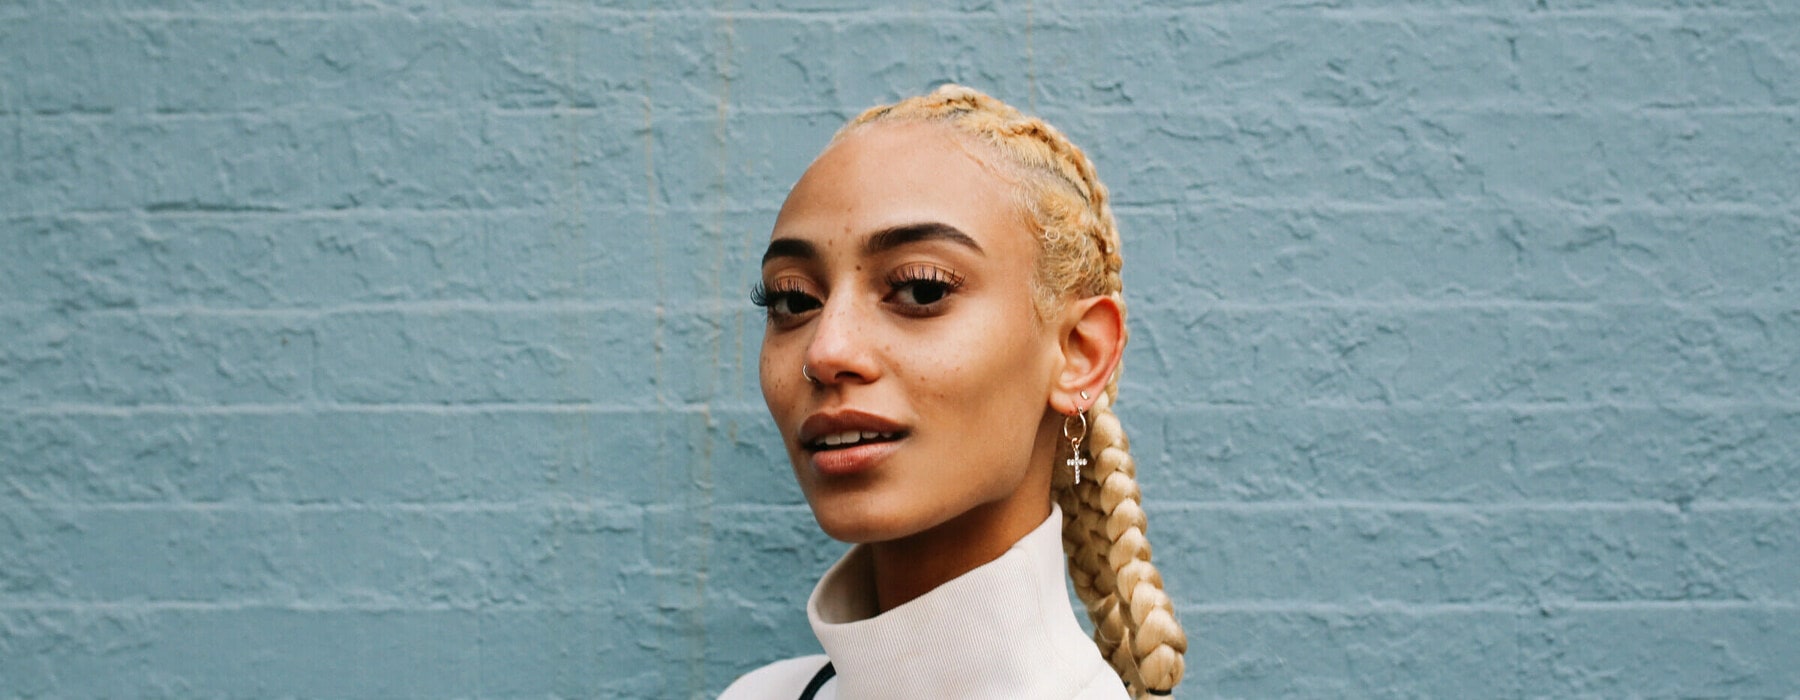 Vintage toned portrait of a young mixed race Latina woman from New York. She is sporting striking blond braids, leaning against the pastel toned brick wall.